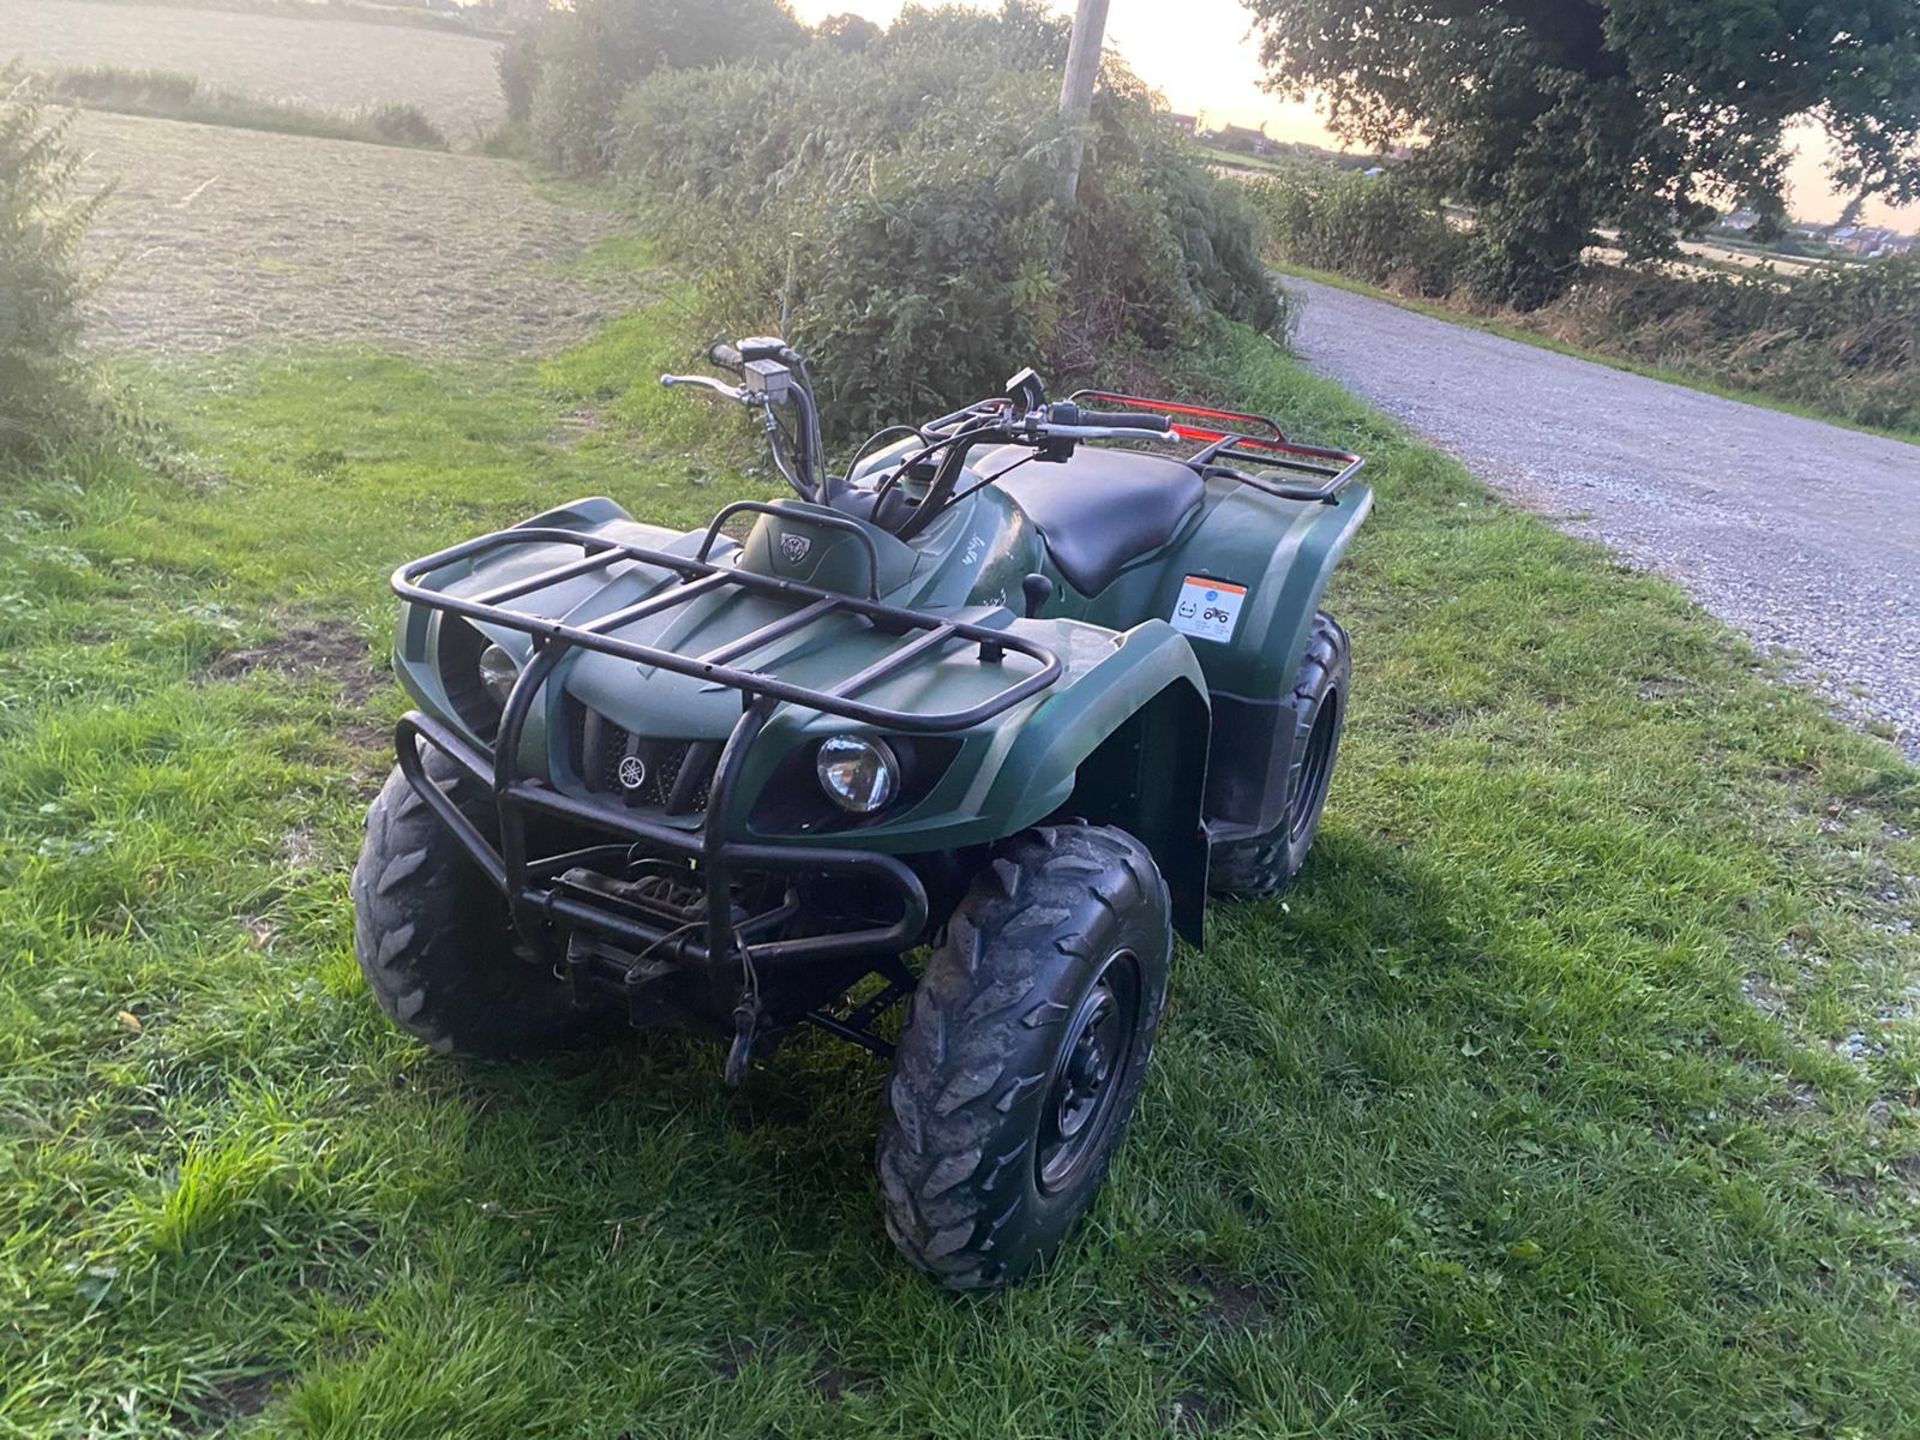 2017 YAMAHA GRIZZLY 350 FARM QUAD BIKE, RUNS AND DRIVES WELL, REAR TOW BAR, GOOD TYRES *NO VAT* - Image 2 of 5